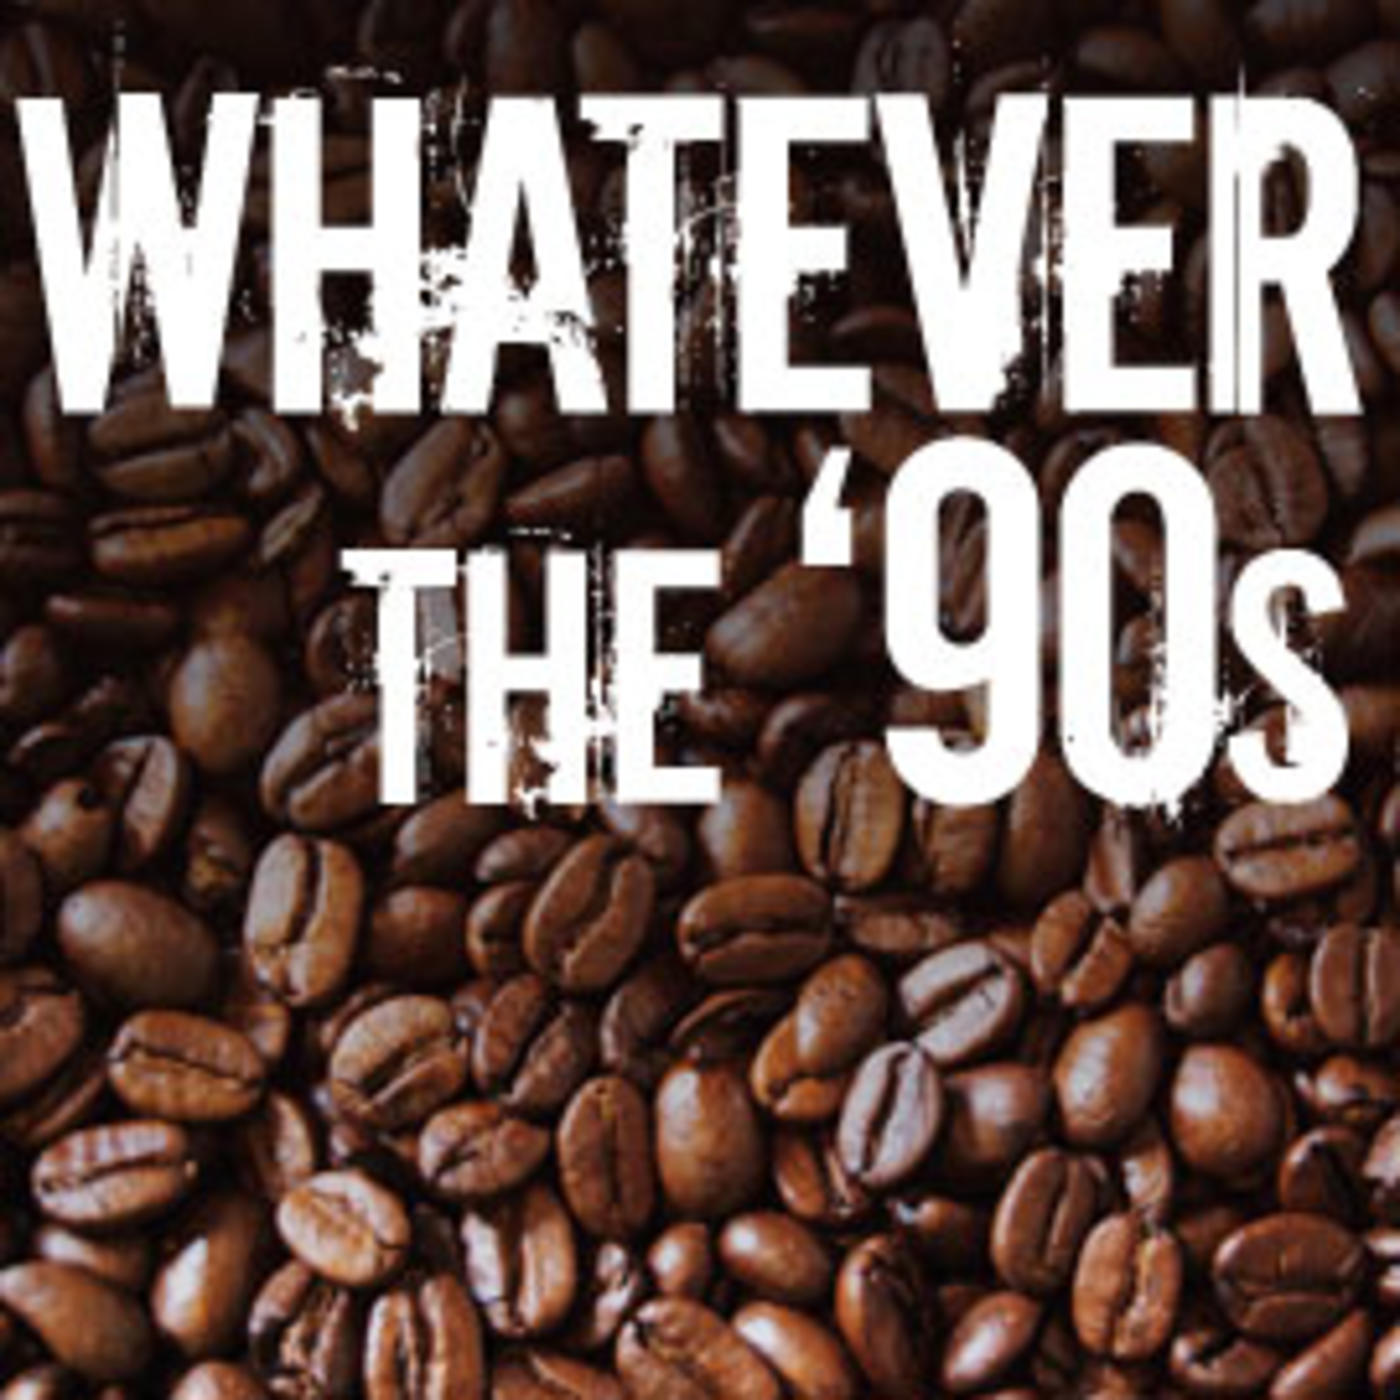 Whatever! The 90s - Red Hot Chili Peppers, Faith No More, Radiohead, Everclear, Soundgarden, Stone Temple Pilots, New Order, The La's, Beck, Matthew Sweet